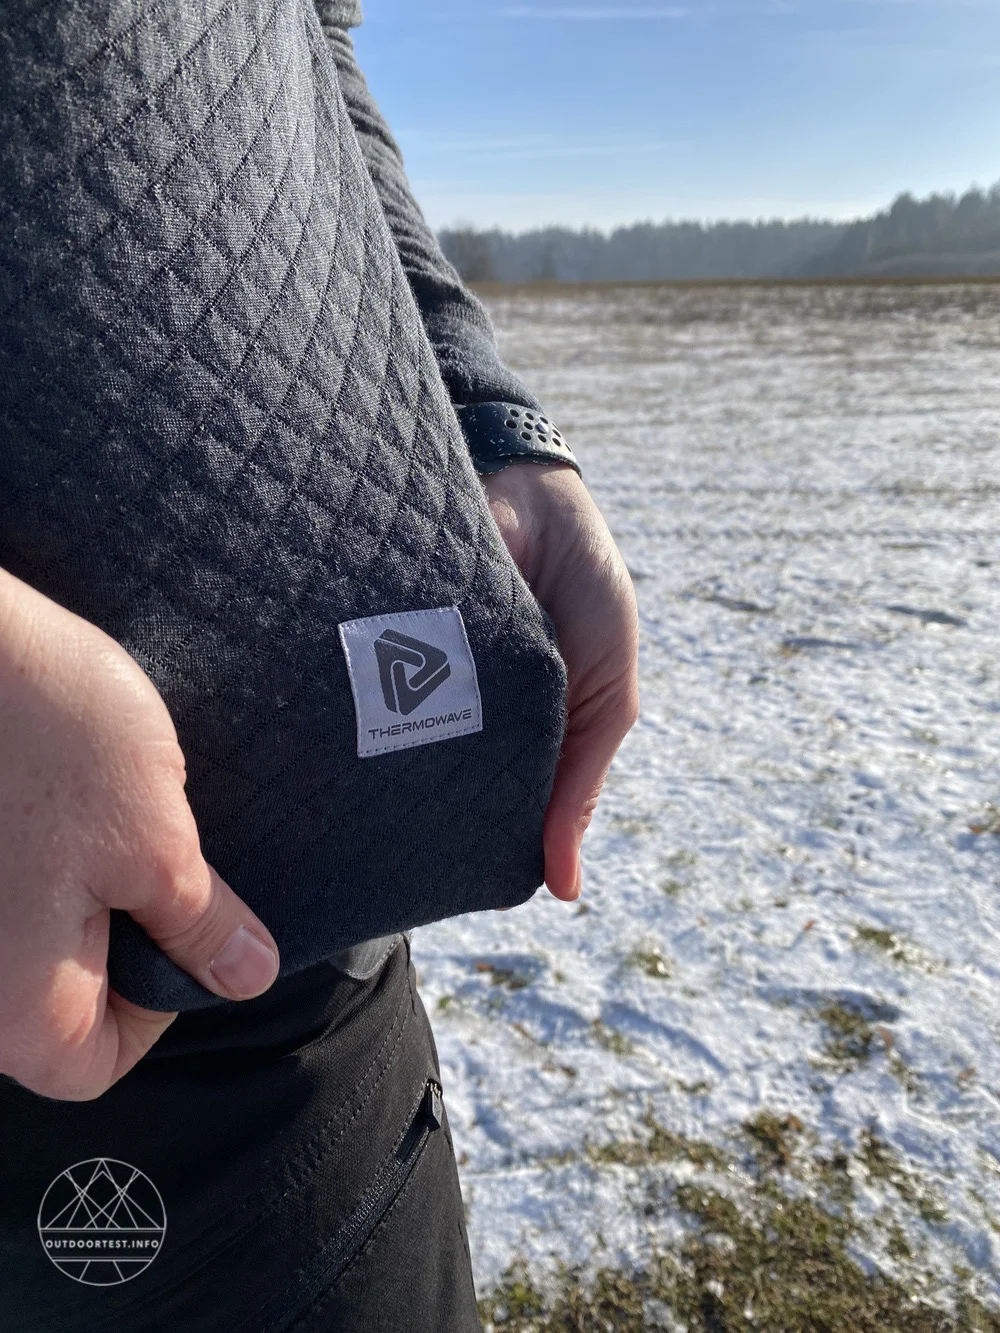 THERMOWAVE Merino 3in1 Langärmeliges Thermoshirt